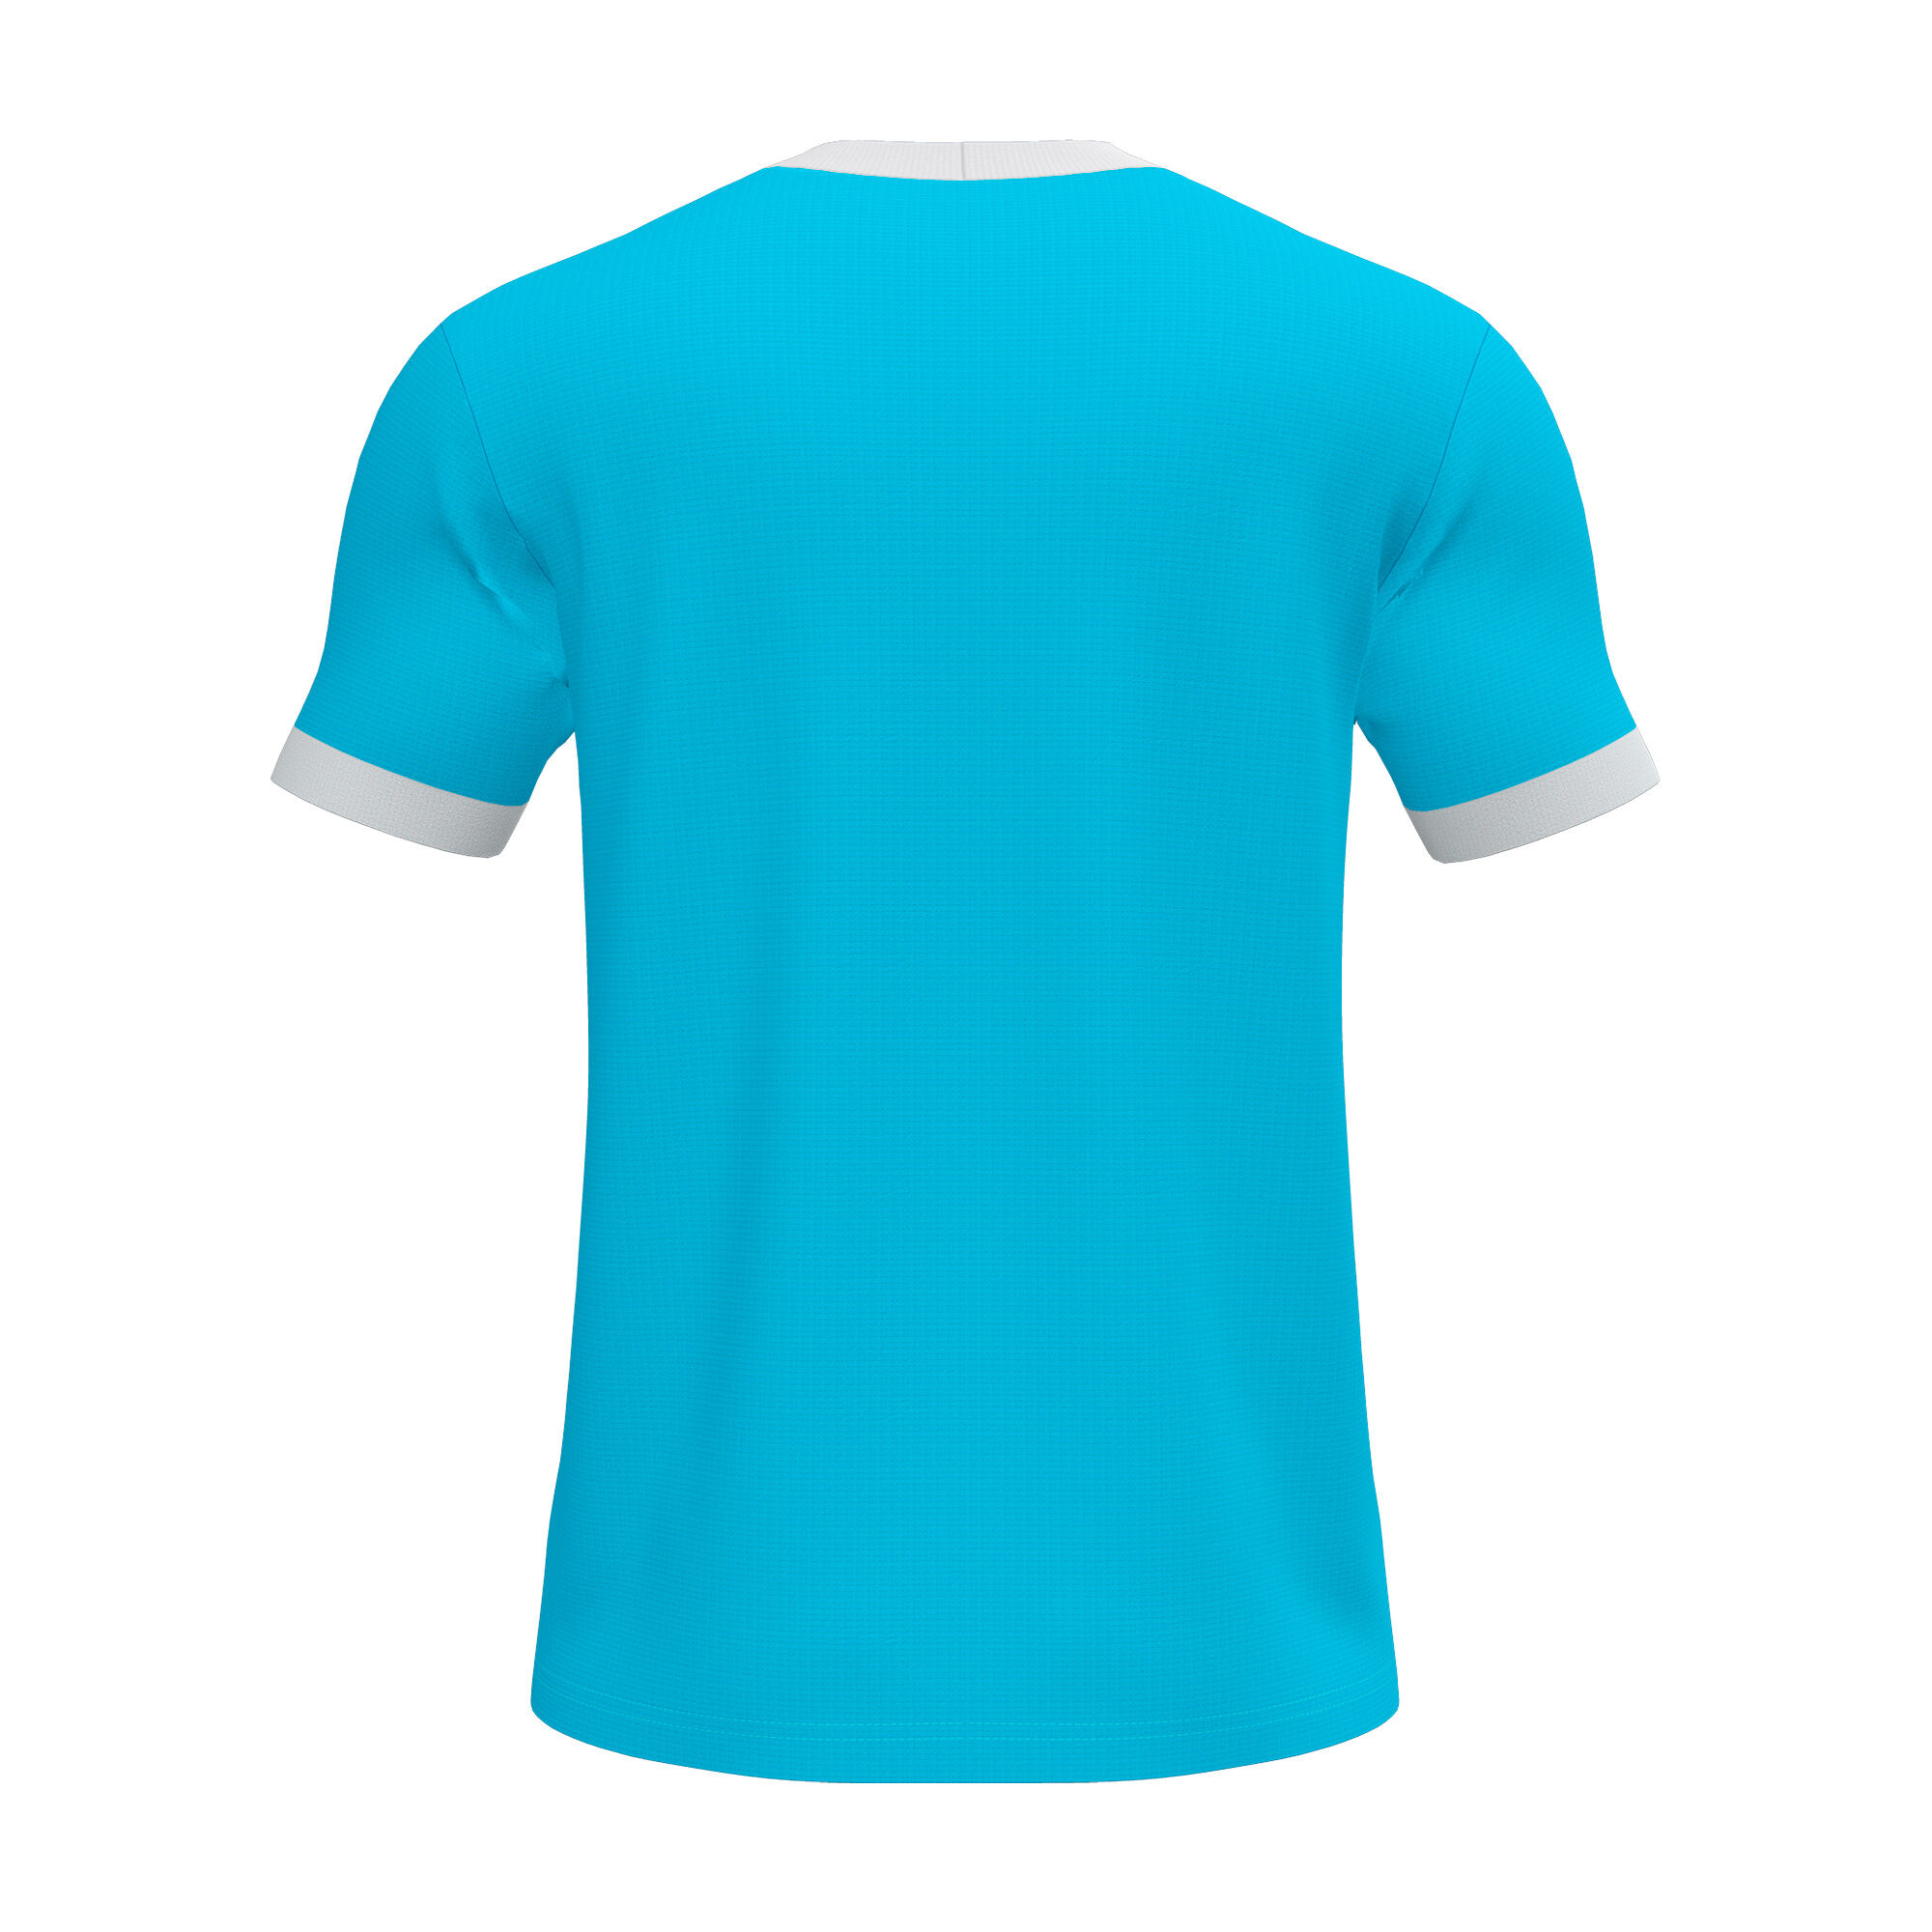 MAILLOT MANCHES COURTES HOMME OPEN III TURQUOISE FLUO